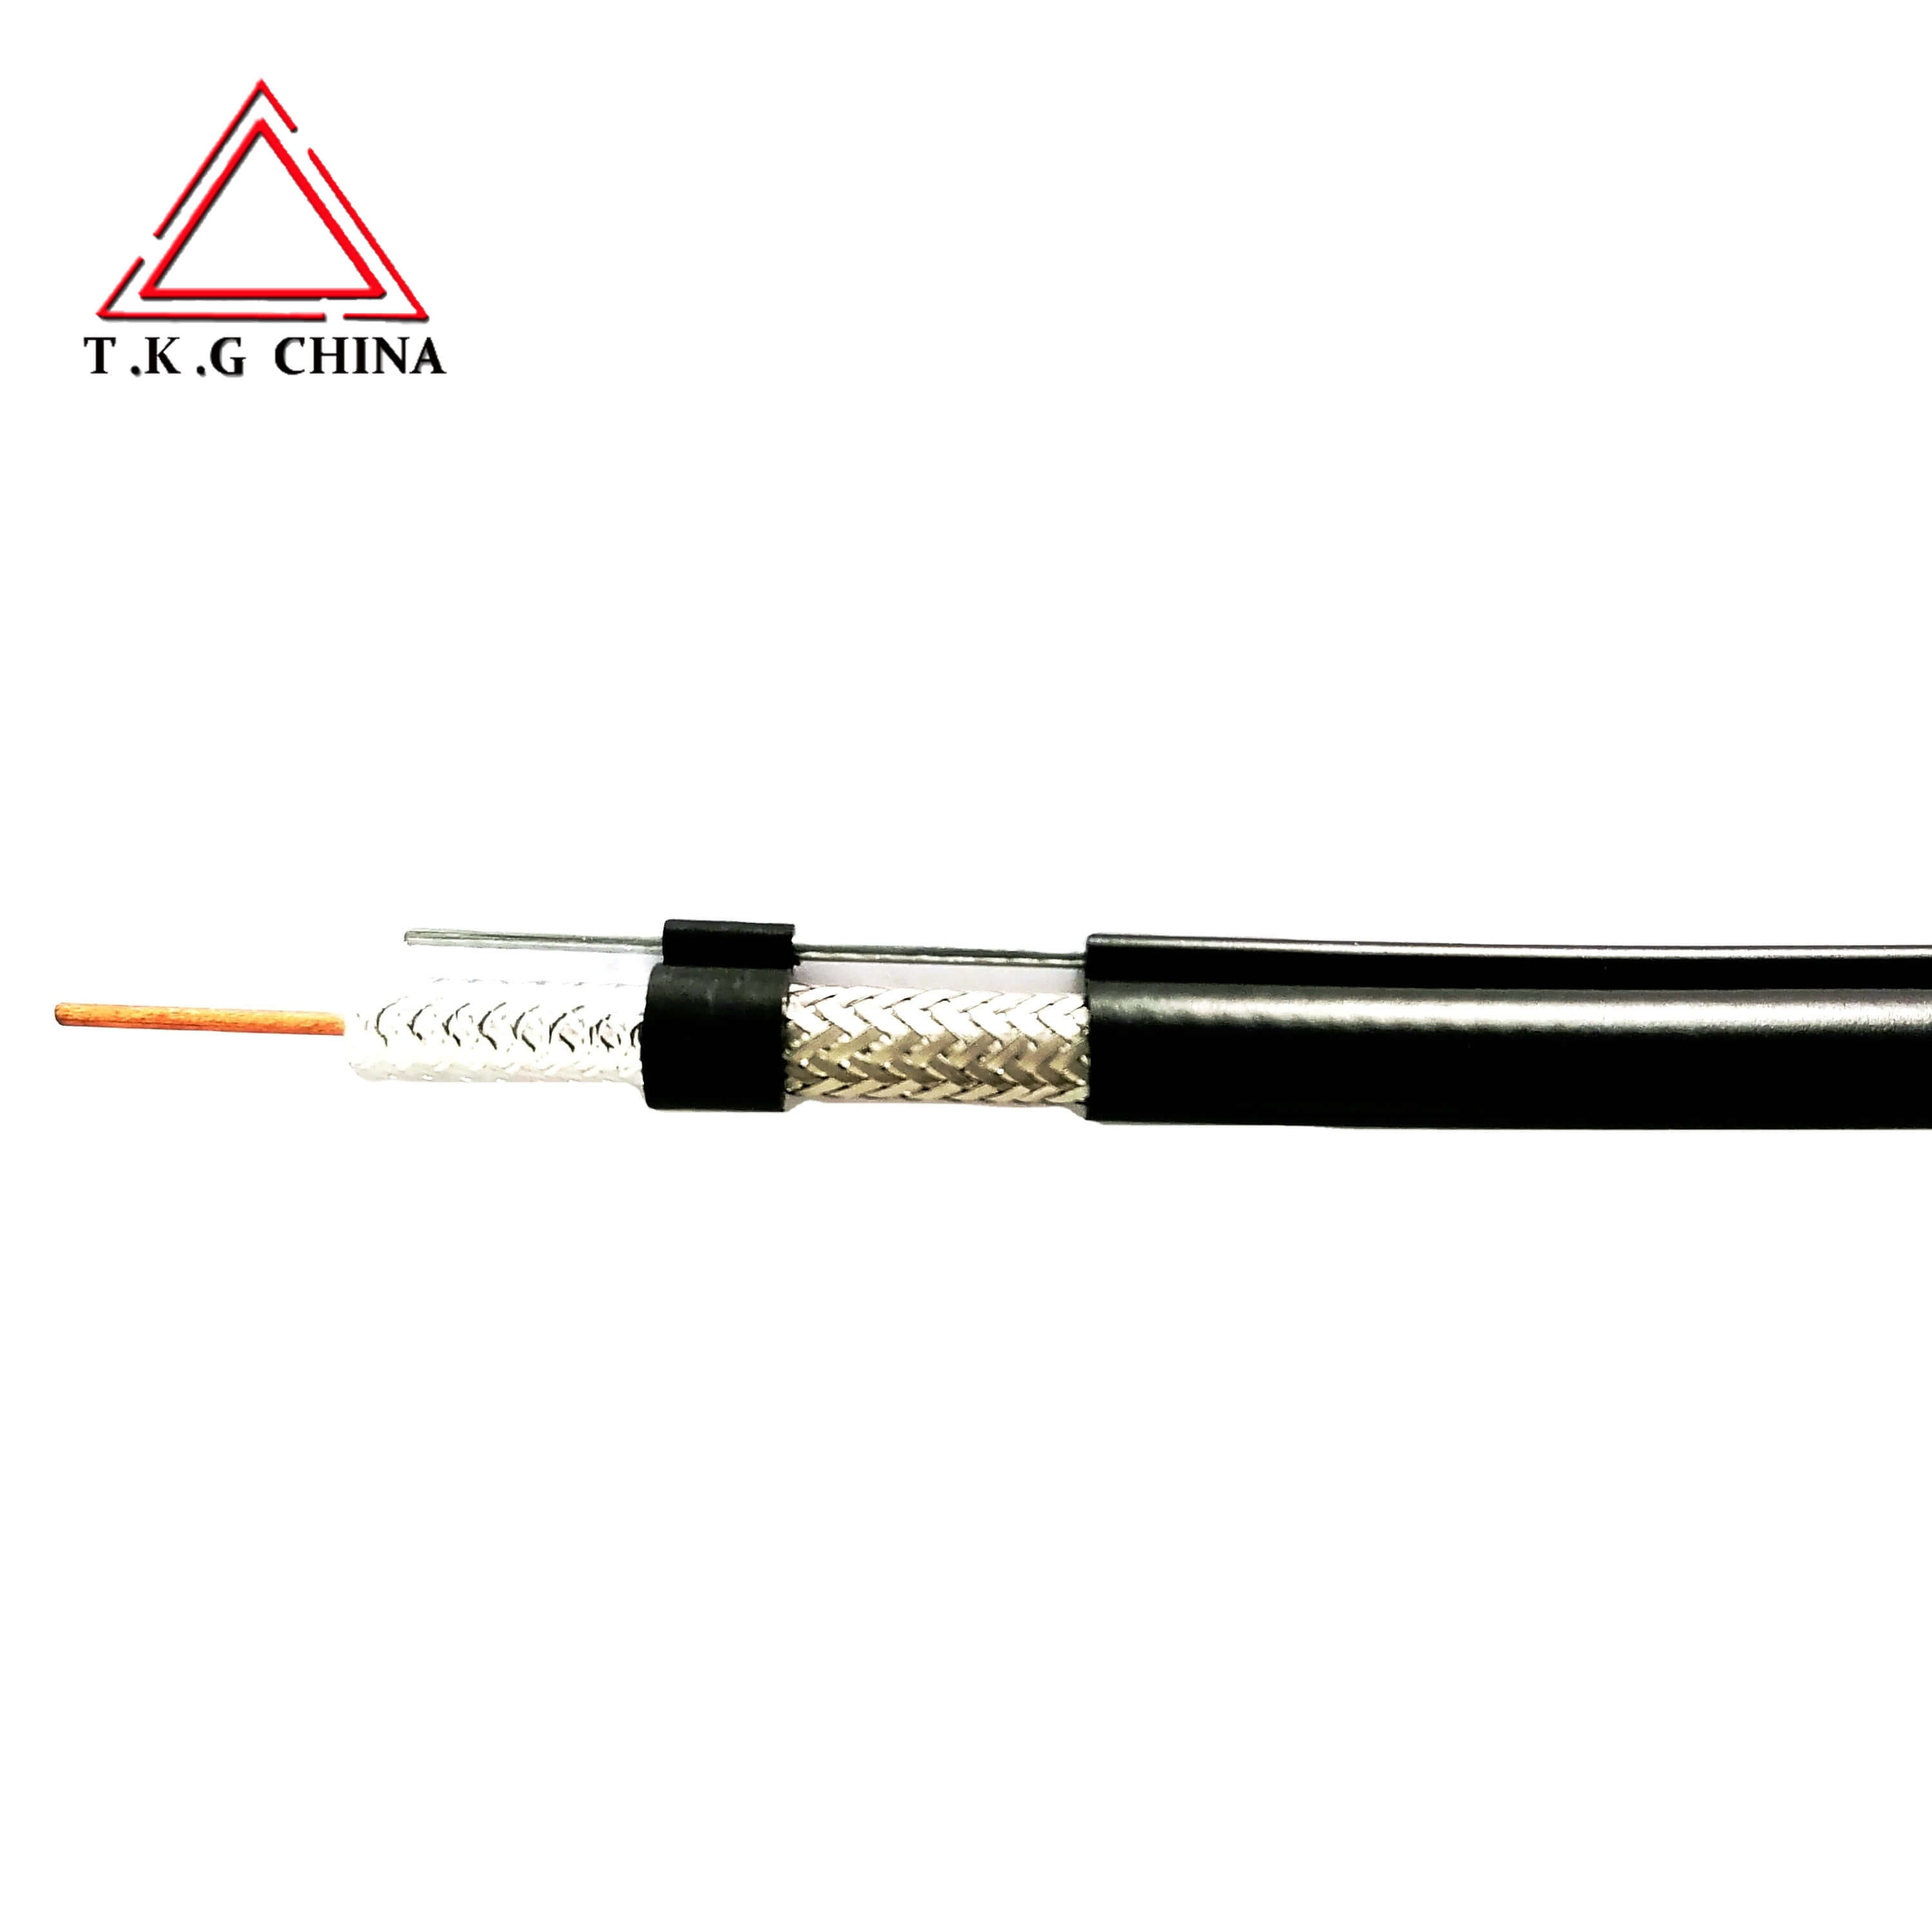 Quality bnc dc cctv cable At Great Prices –